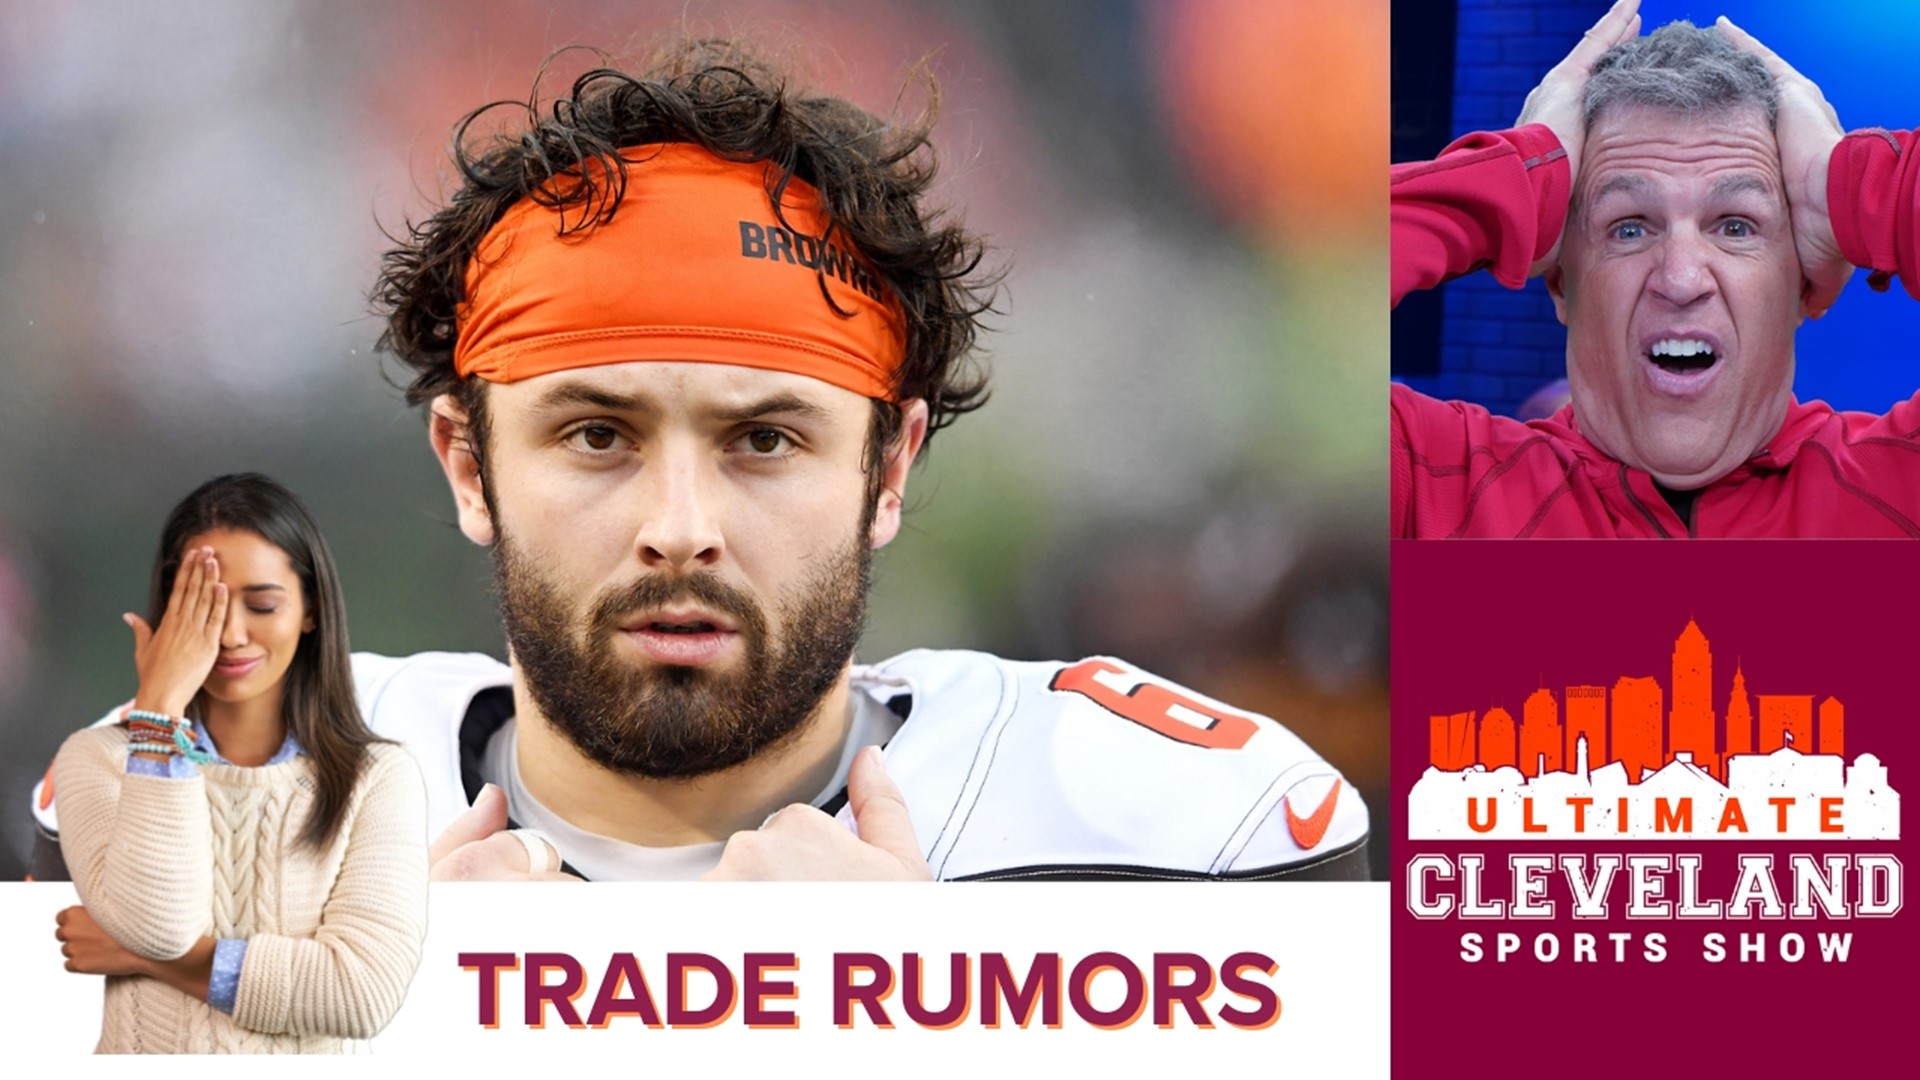 Jay addresses the Baker Mayfield trade rumors and possible teams that may want the QB. Seattle Seahawks & San Francisco 49ers are the 2 teams the UCSS guys question.